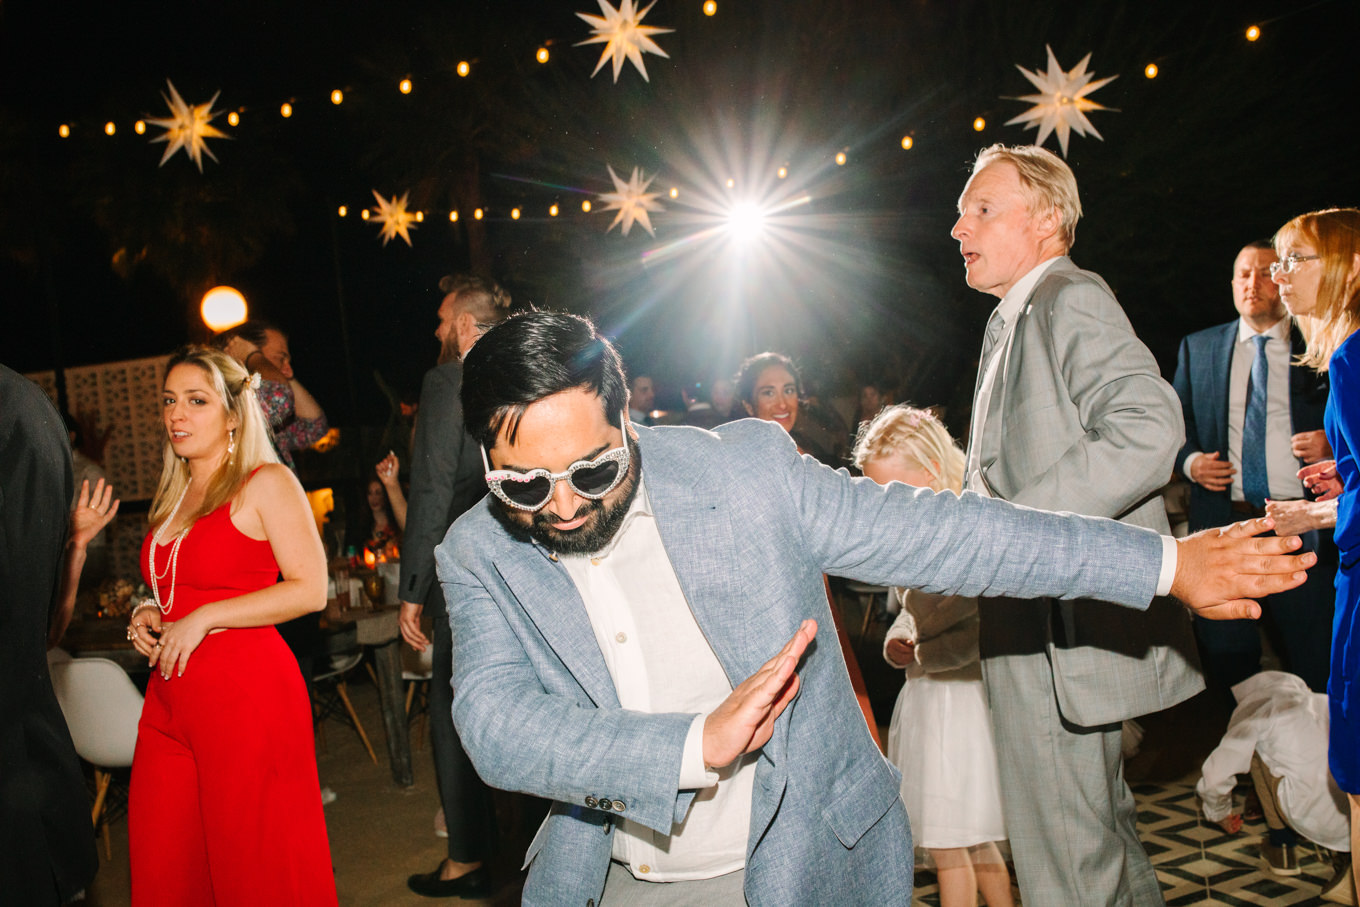 Dancing at wedding reception | Pink and orange Lautner Compound wedding | Colorful Palm Springs wedding photography | #palmspringsphotographer #palmspringswedding #lautnercompound #southerncaliforniawedding  Source: Mary Costa Photography | Los Angeles